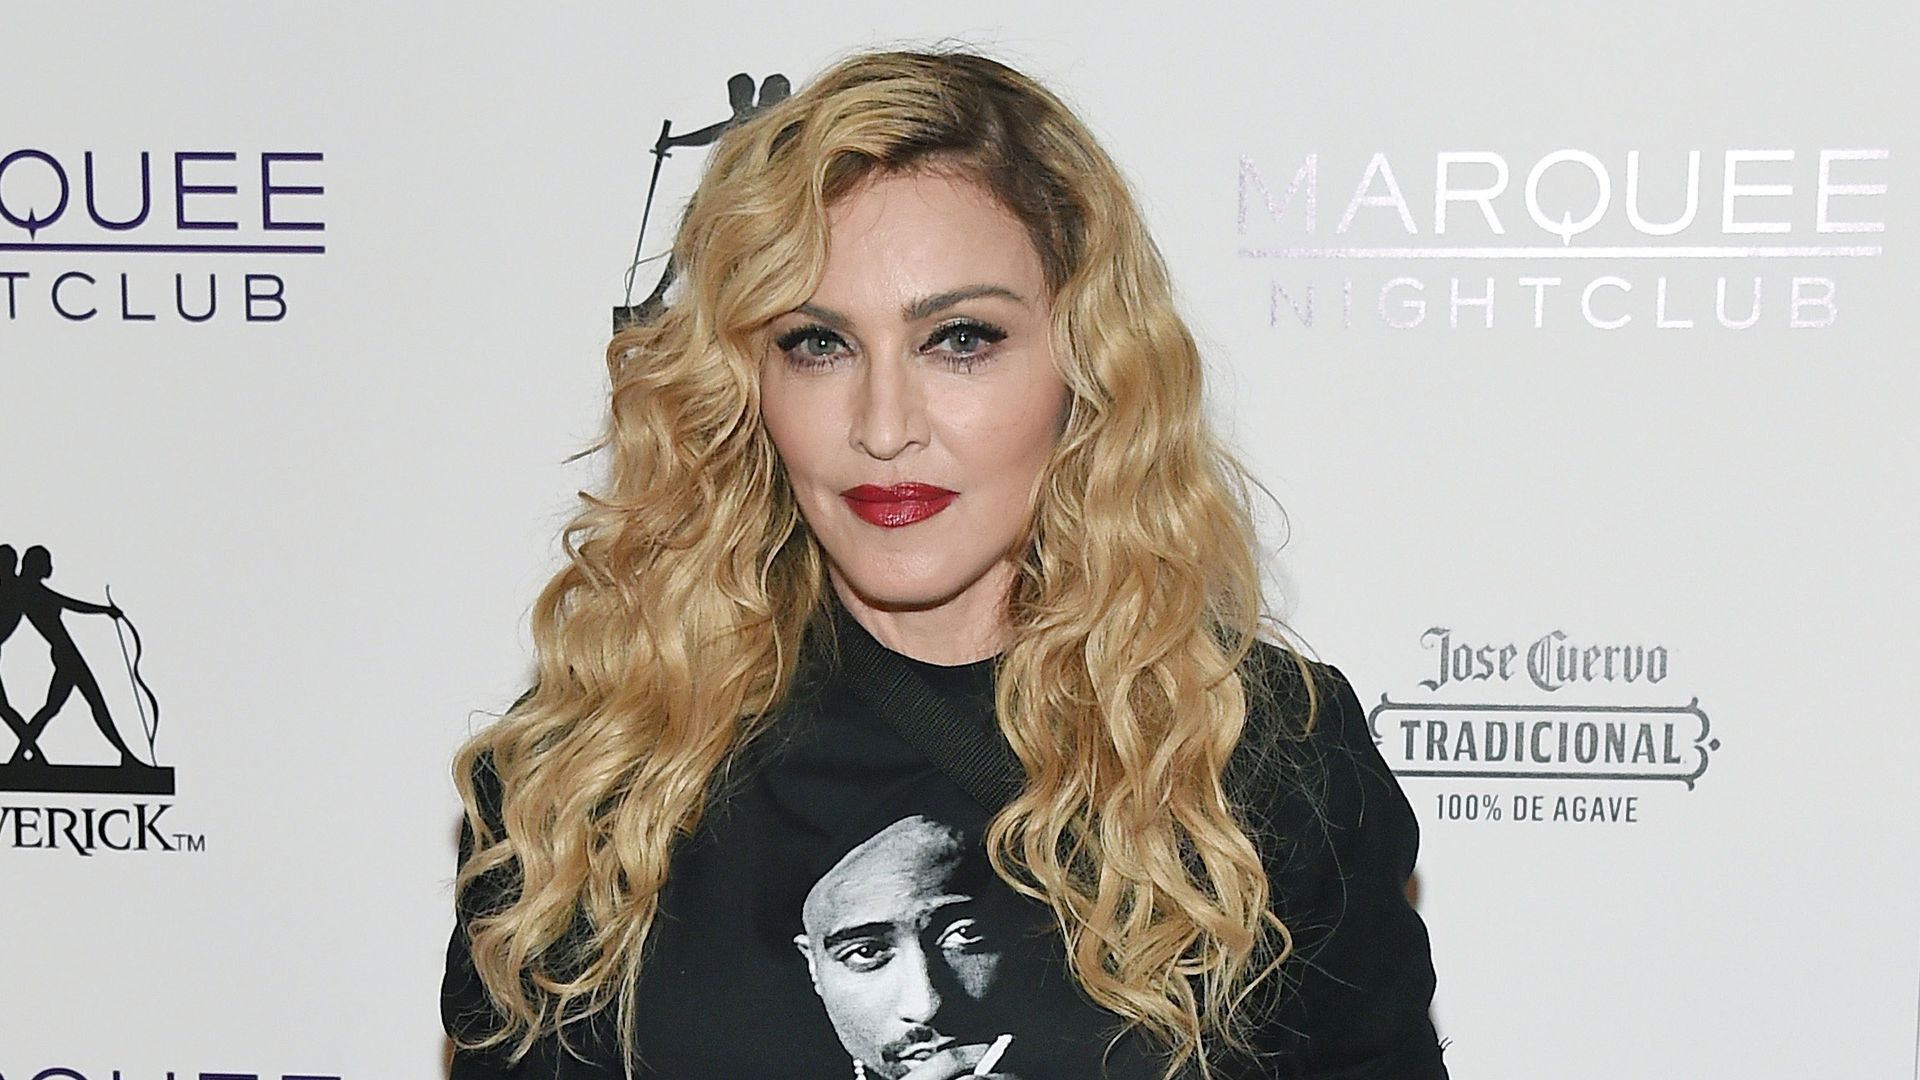 Madonna arrives at the Marquee Nightclub at The Cosmopolitan of Las Vegas to host an after party for her Rebel Heart Tour concert stop on October 25, 2015 in Las Vegas, Nevada